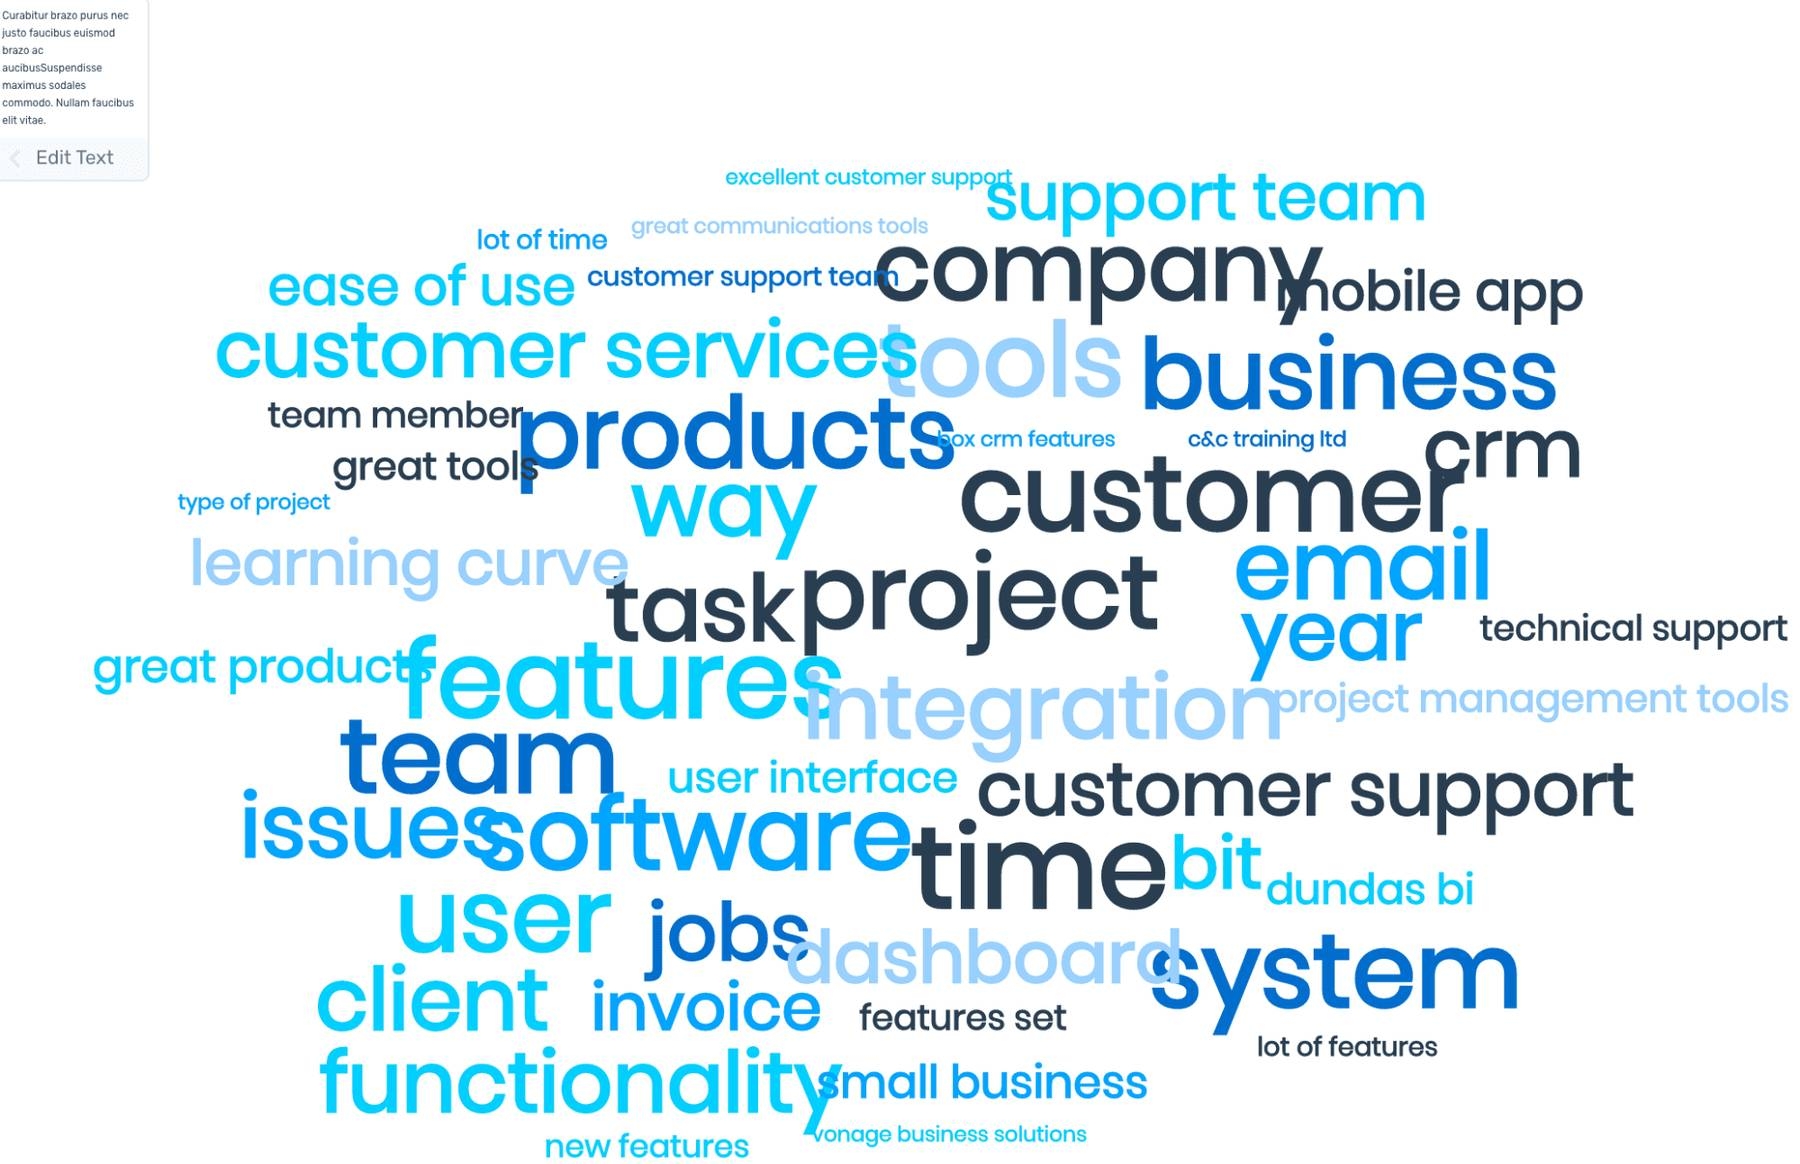 An example of a word cloud from SaaS software review data.